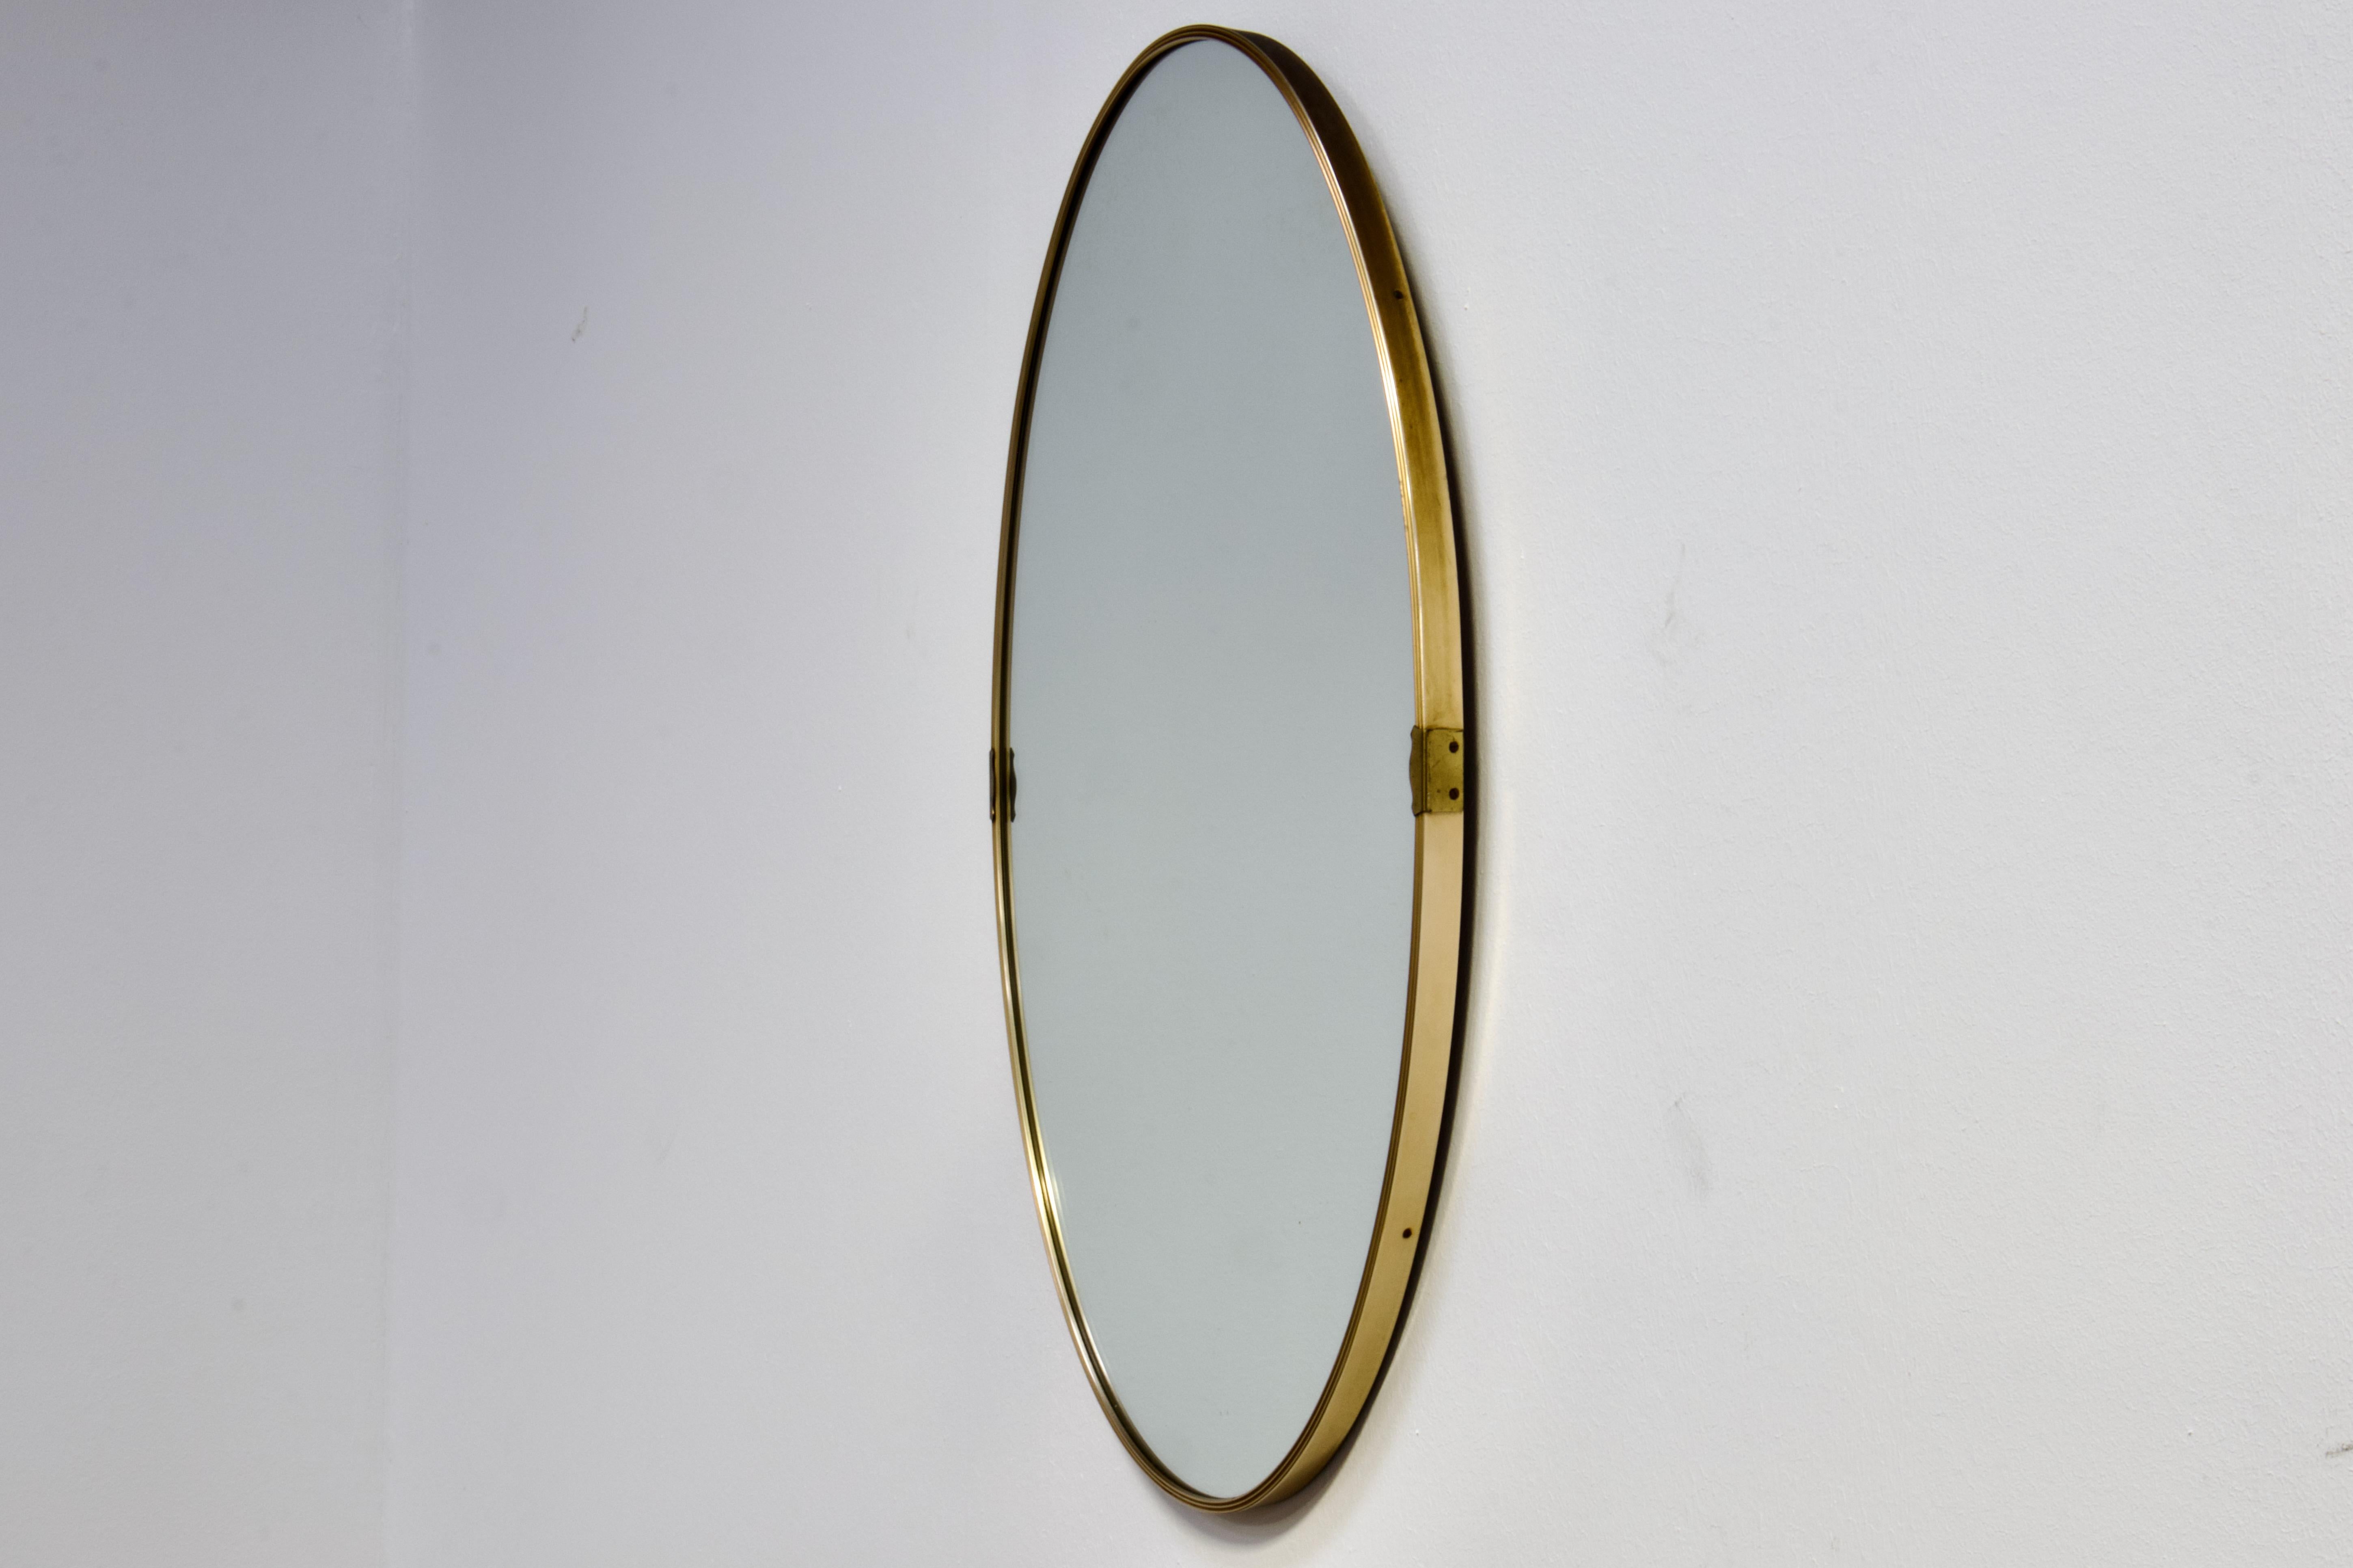 XL 1950s Gio Ponti Era Mid-Century Modern Italian Brass Oval Wall Mirror In Good Condition For Sale In Grand Cayman, KY